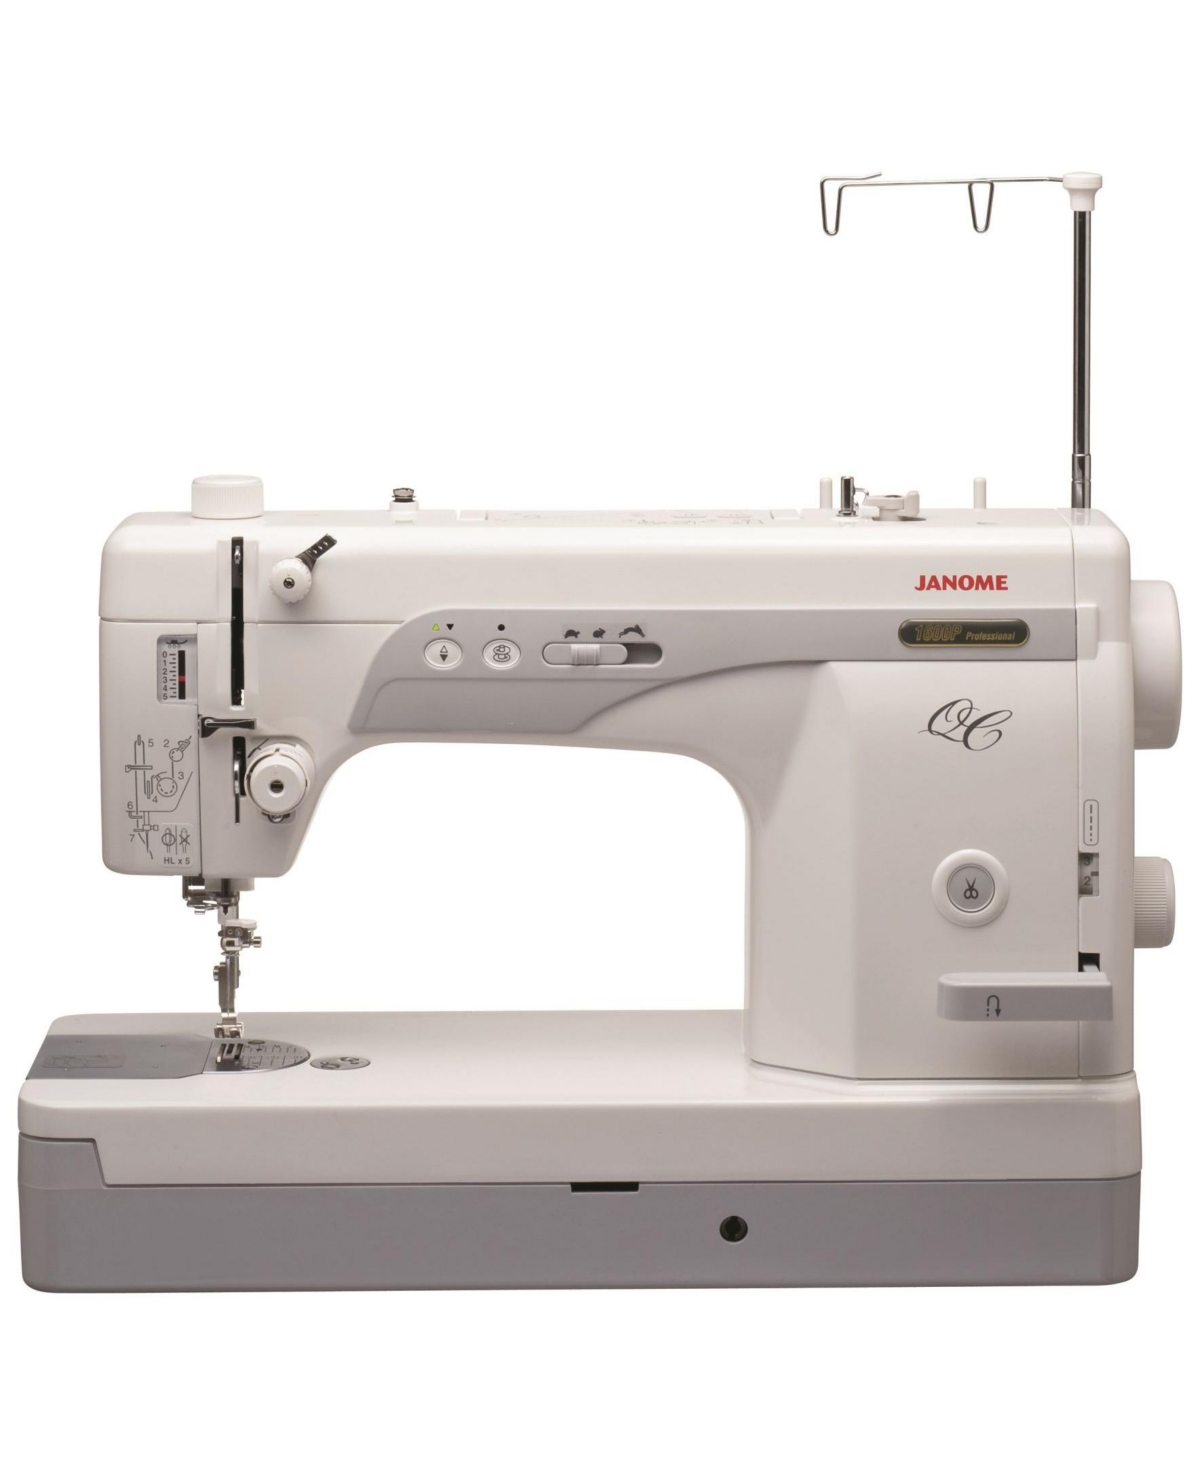 1600P-qc High Speed Mechanical Sewing & Quilting Machine - White